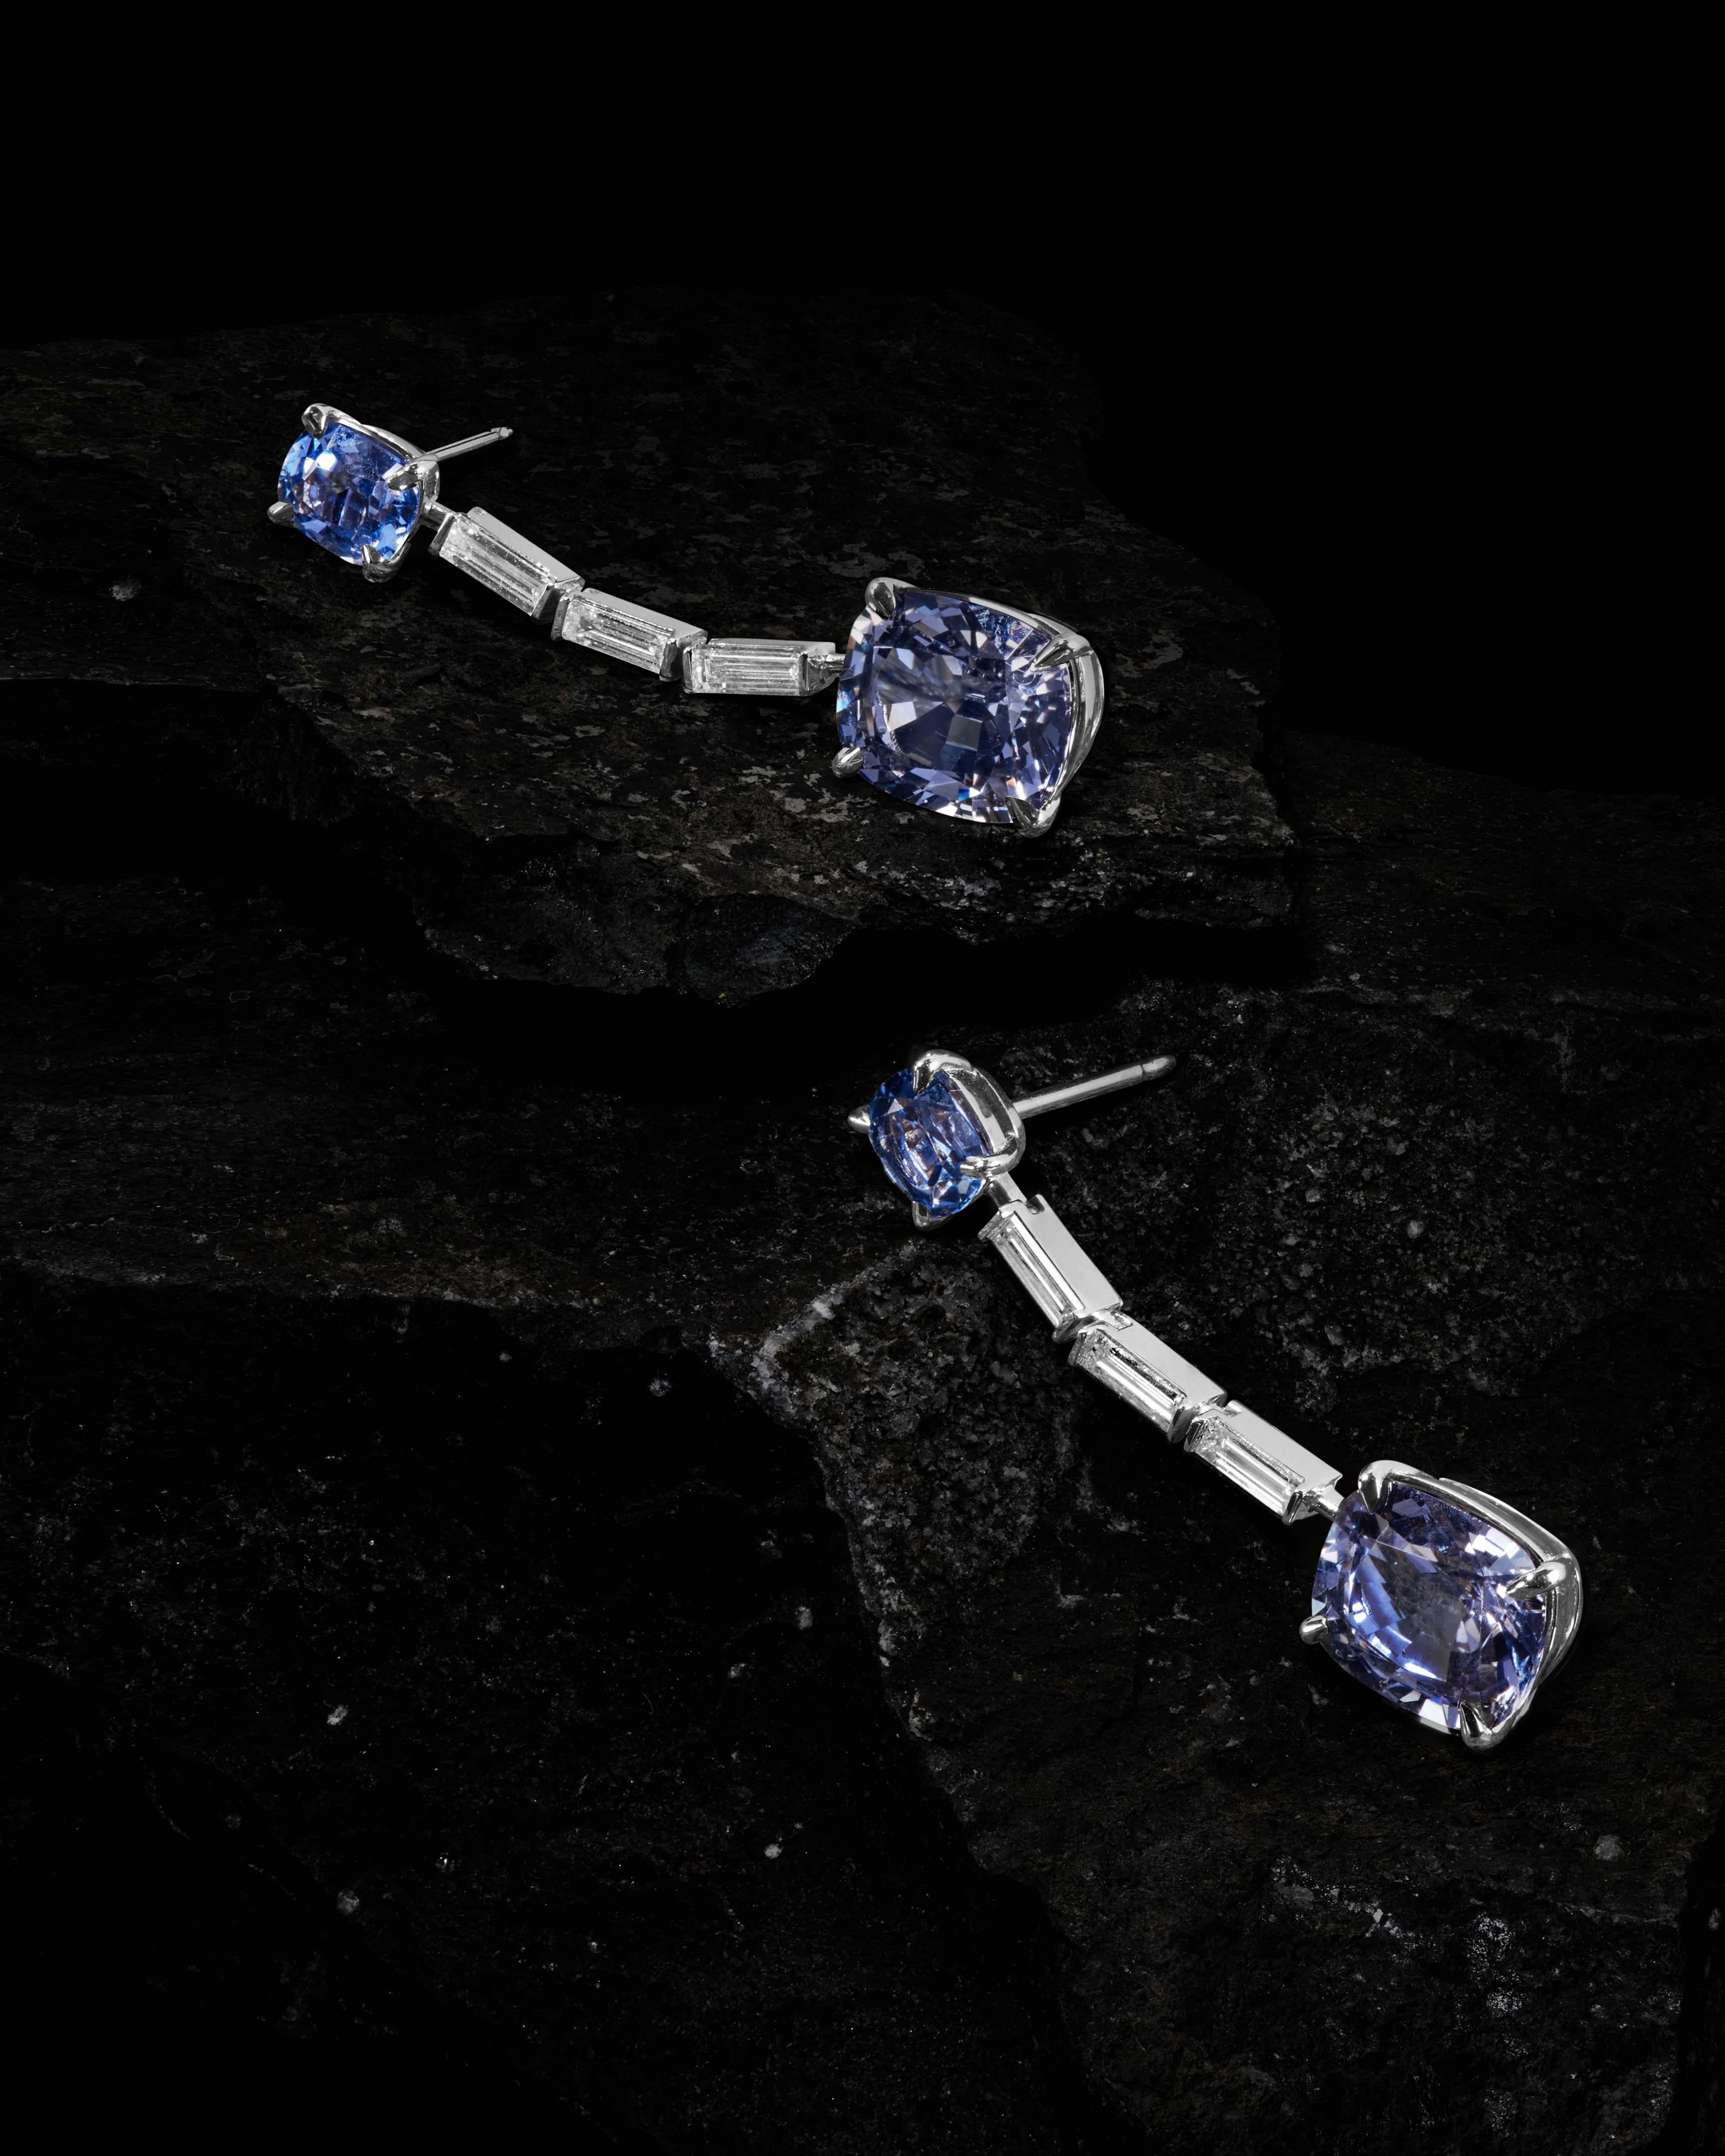 7.94 Ct. Burmese Spinel Drop Earrings, 18K White Gold In New Condition For Sale In Brooklyn, NY